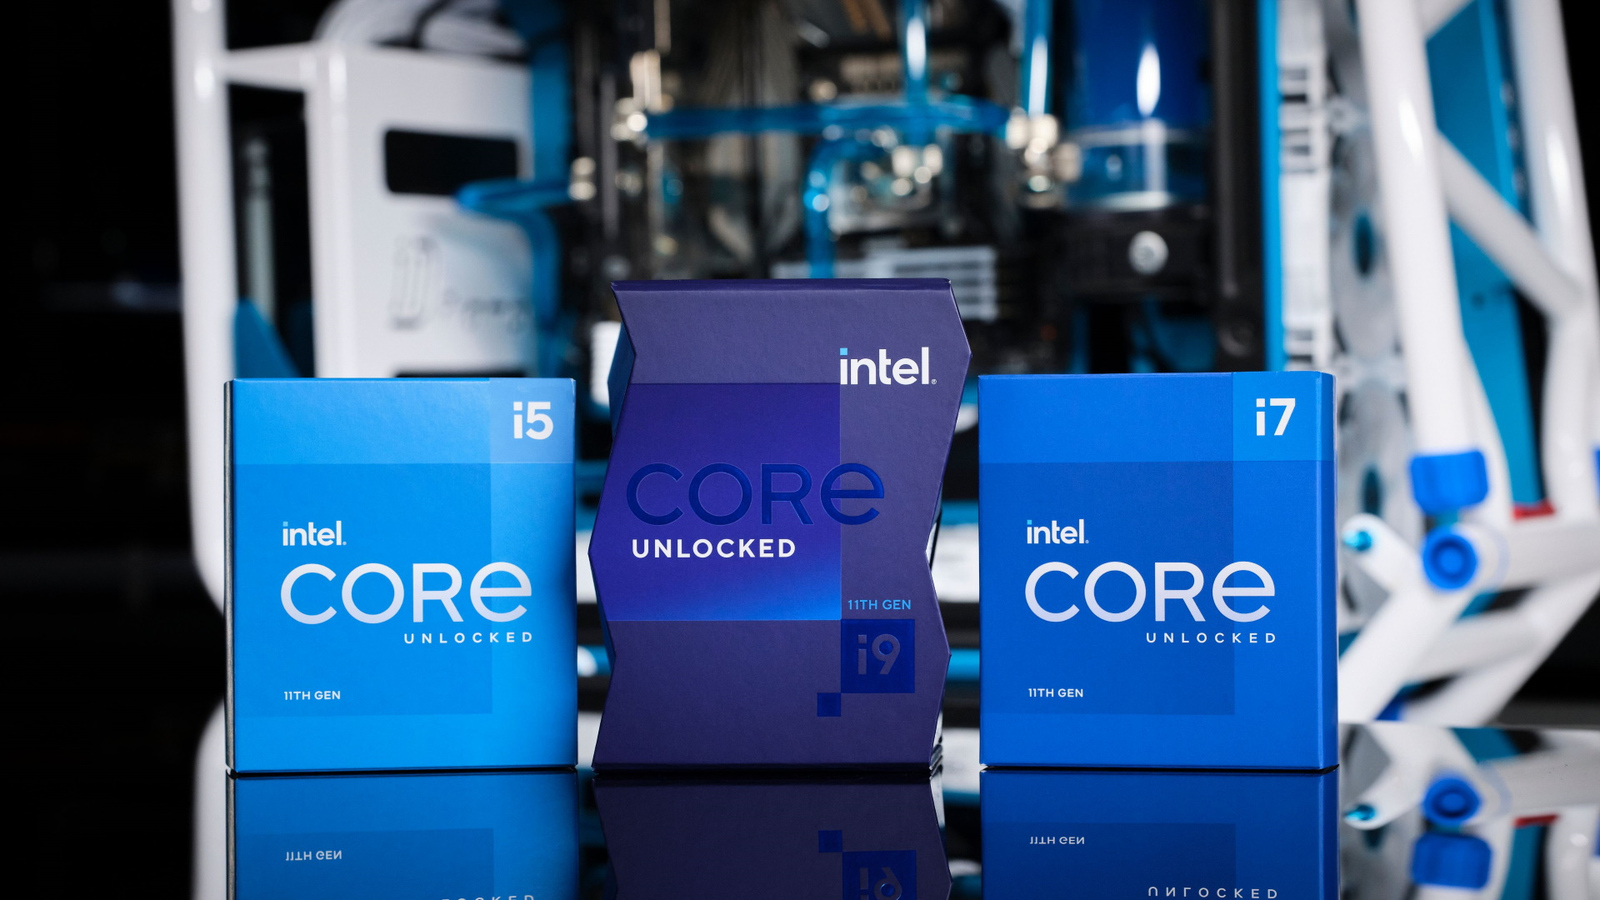 Intel 11th Gen Rocket Lake CPUs: release date, specs and